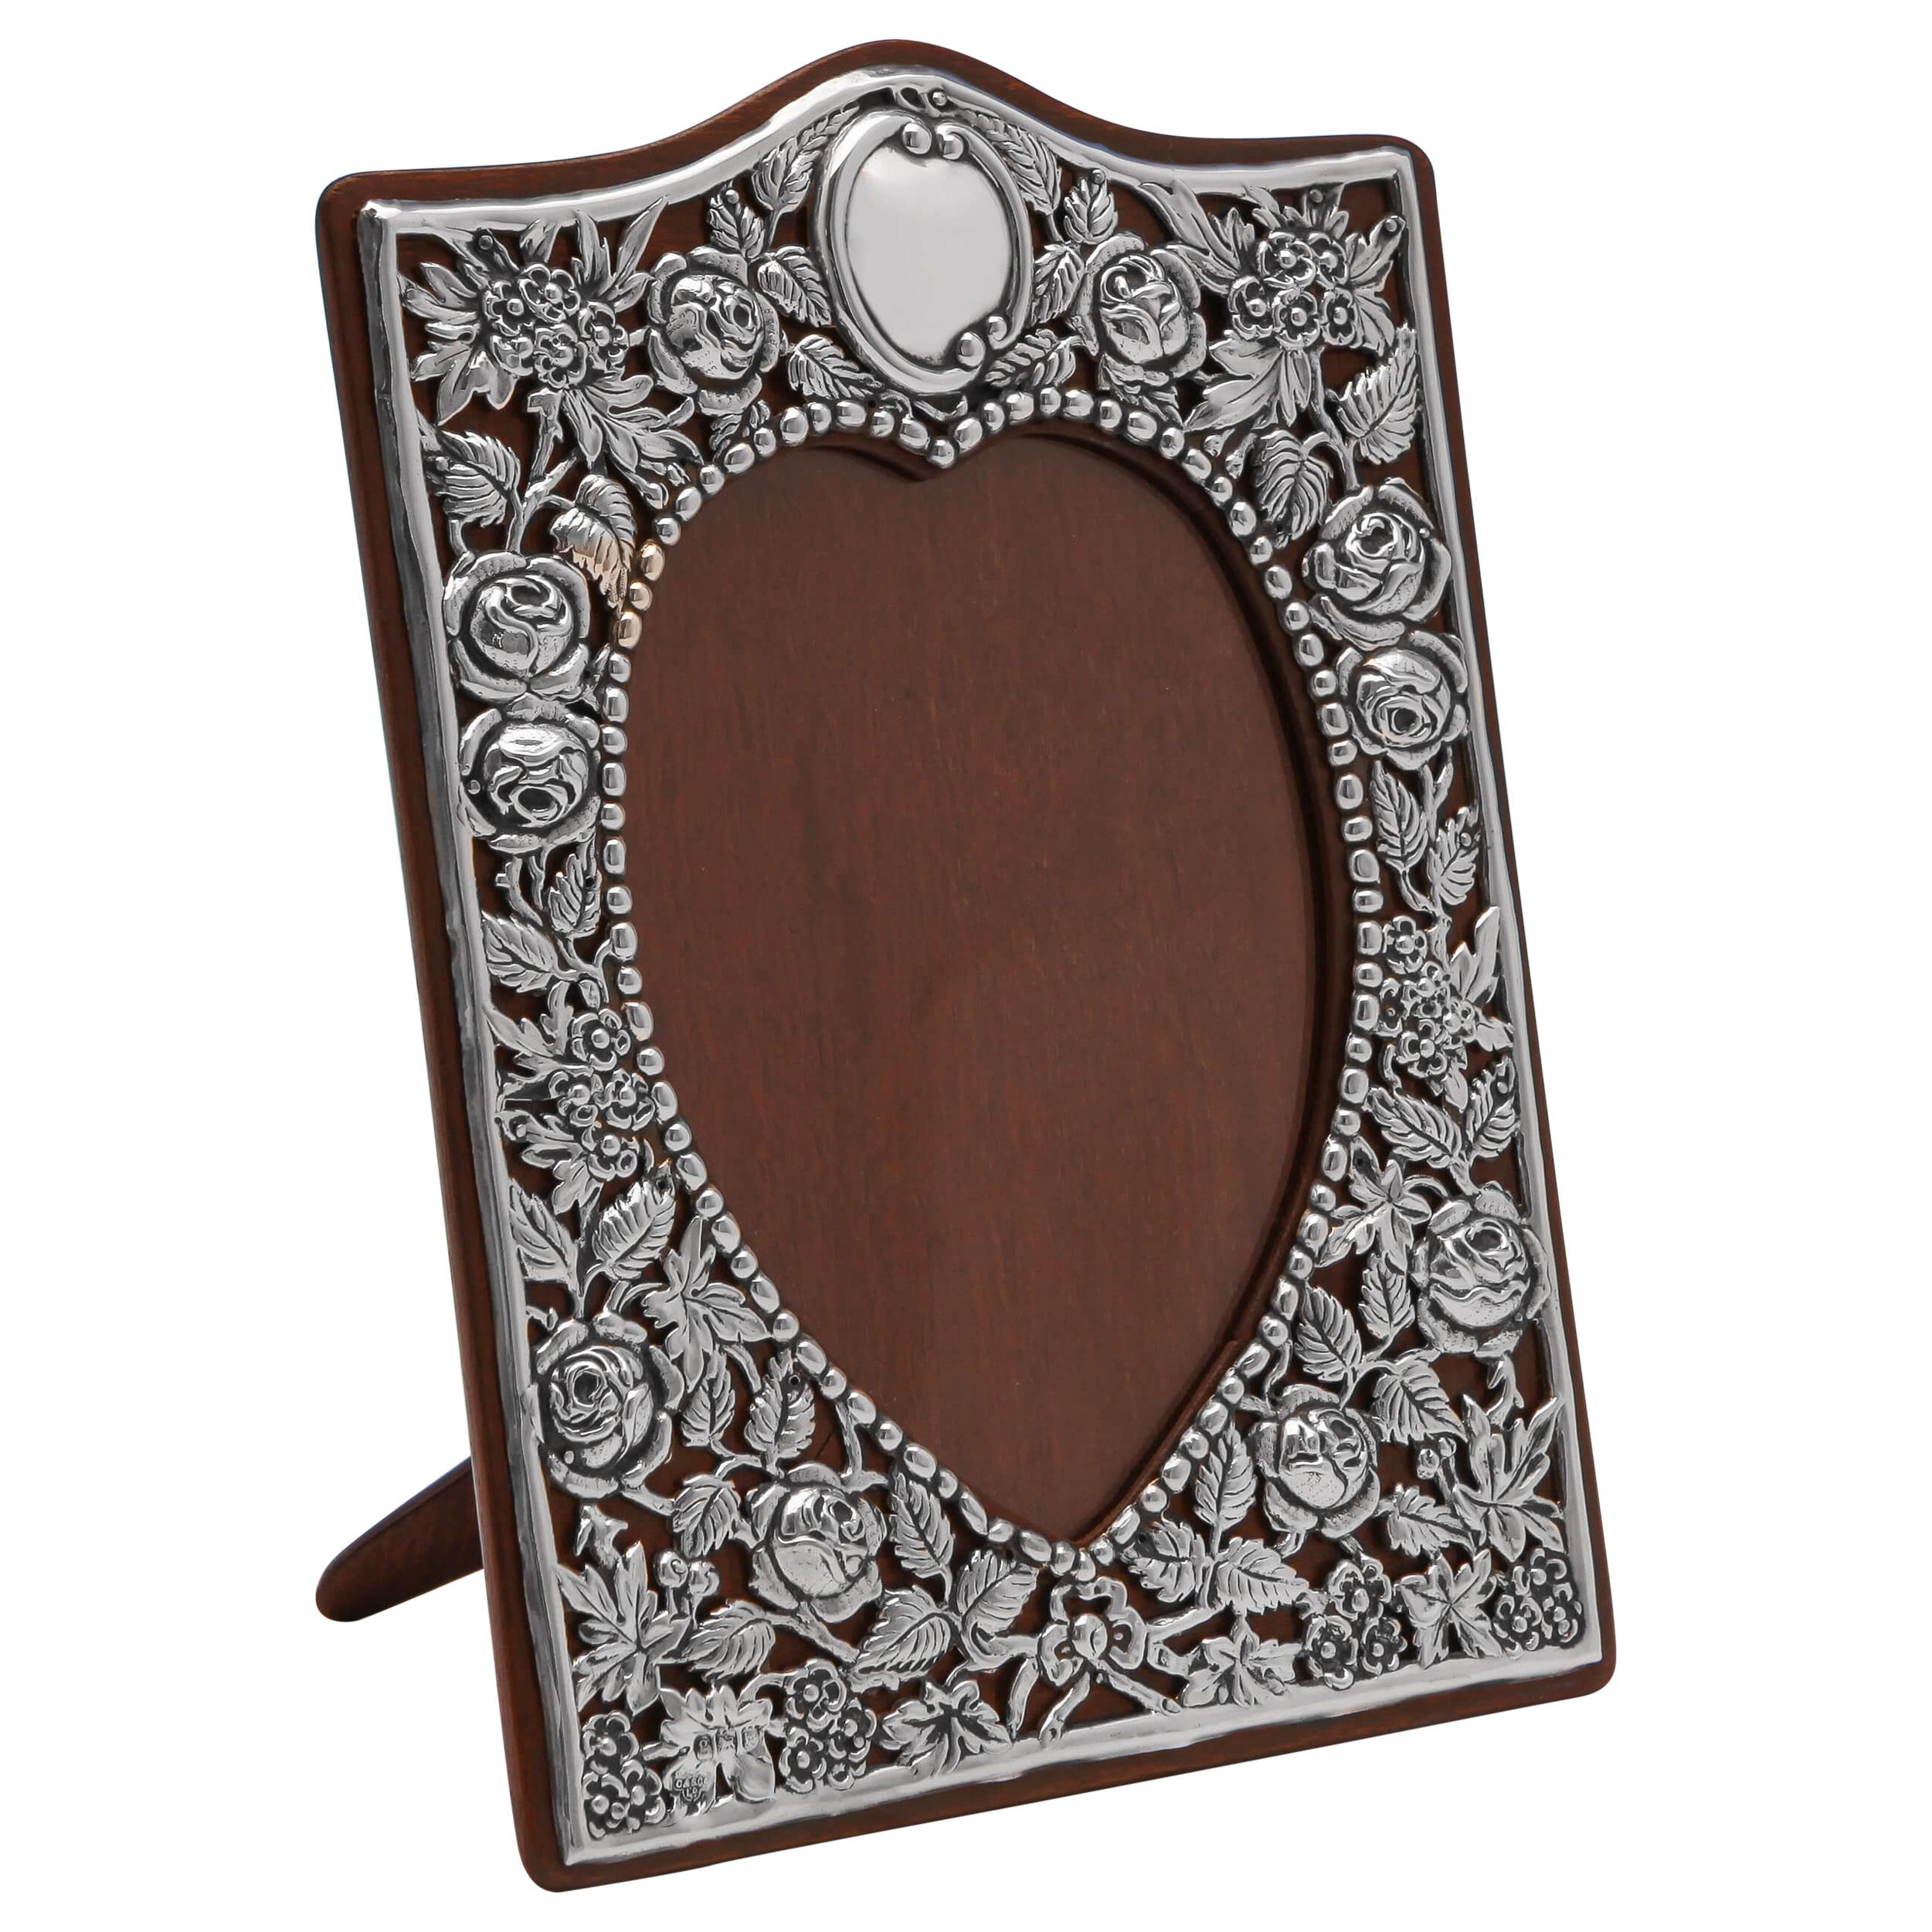 Heart Shaped Art Nouveau Antique Sterling Silver Photograph Frame from 1902